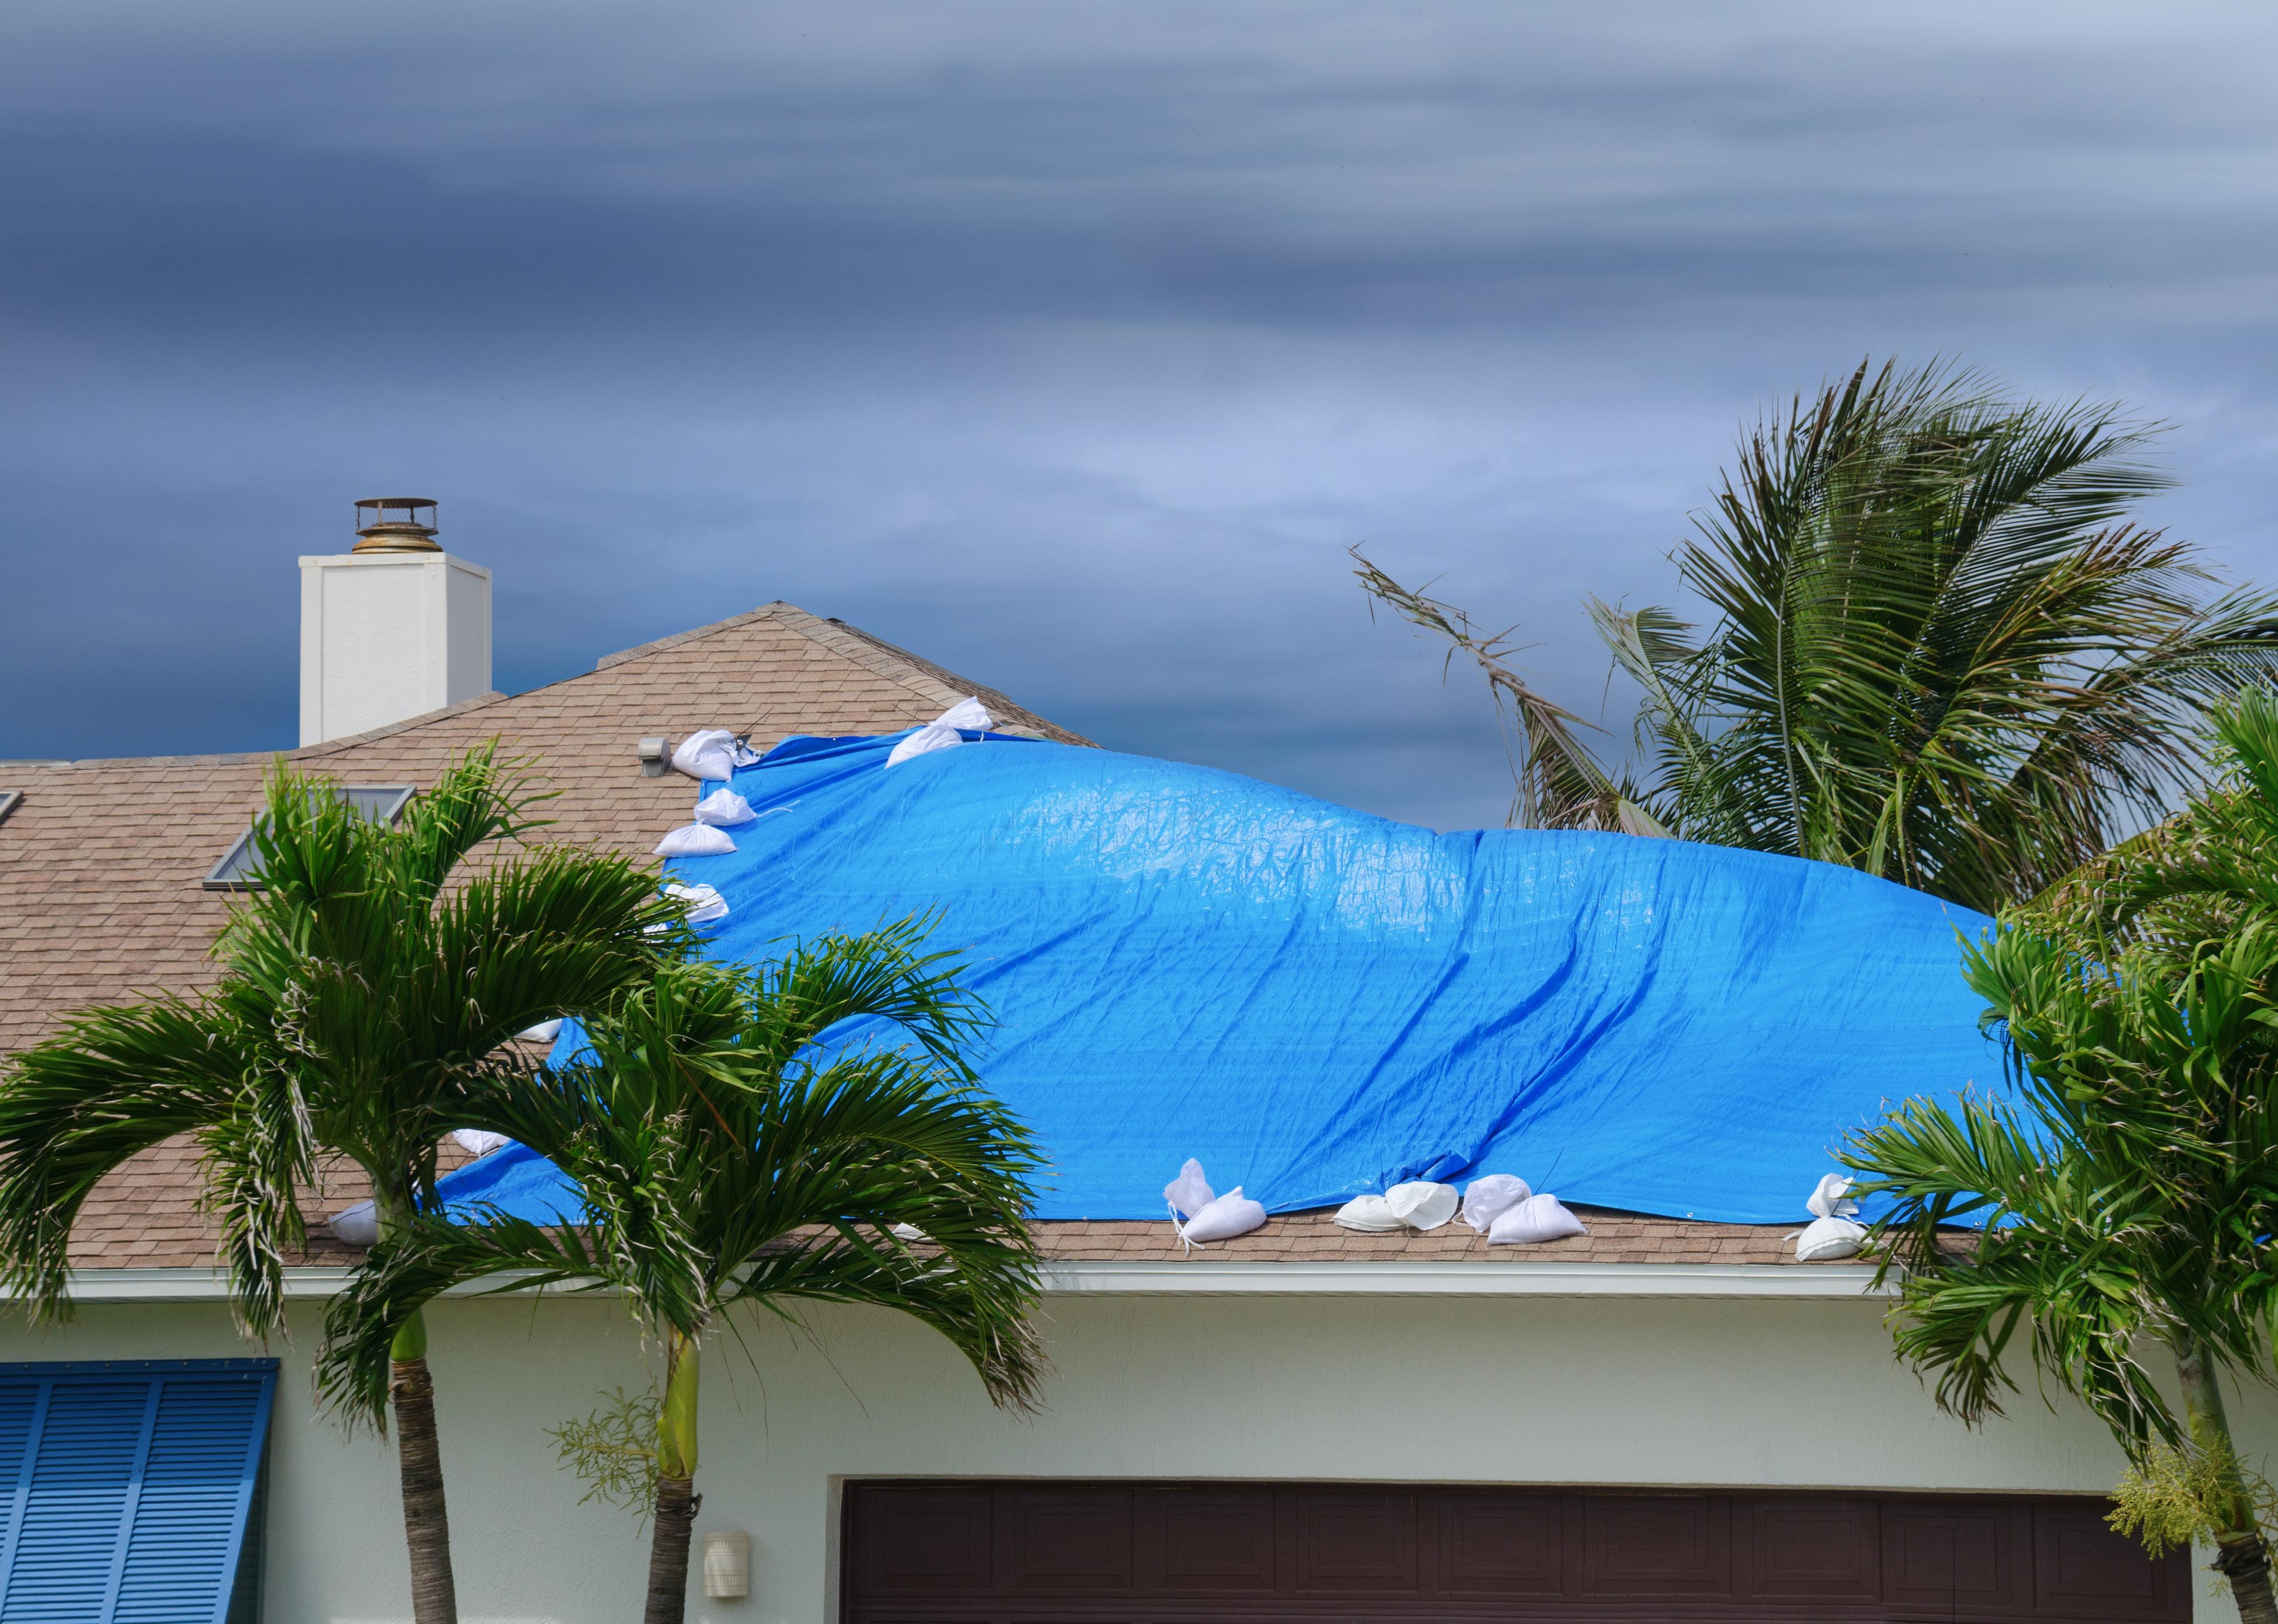 Storm damaged roof with a protective blue tarp over a hole.